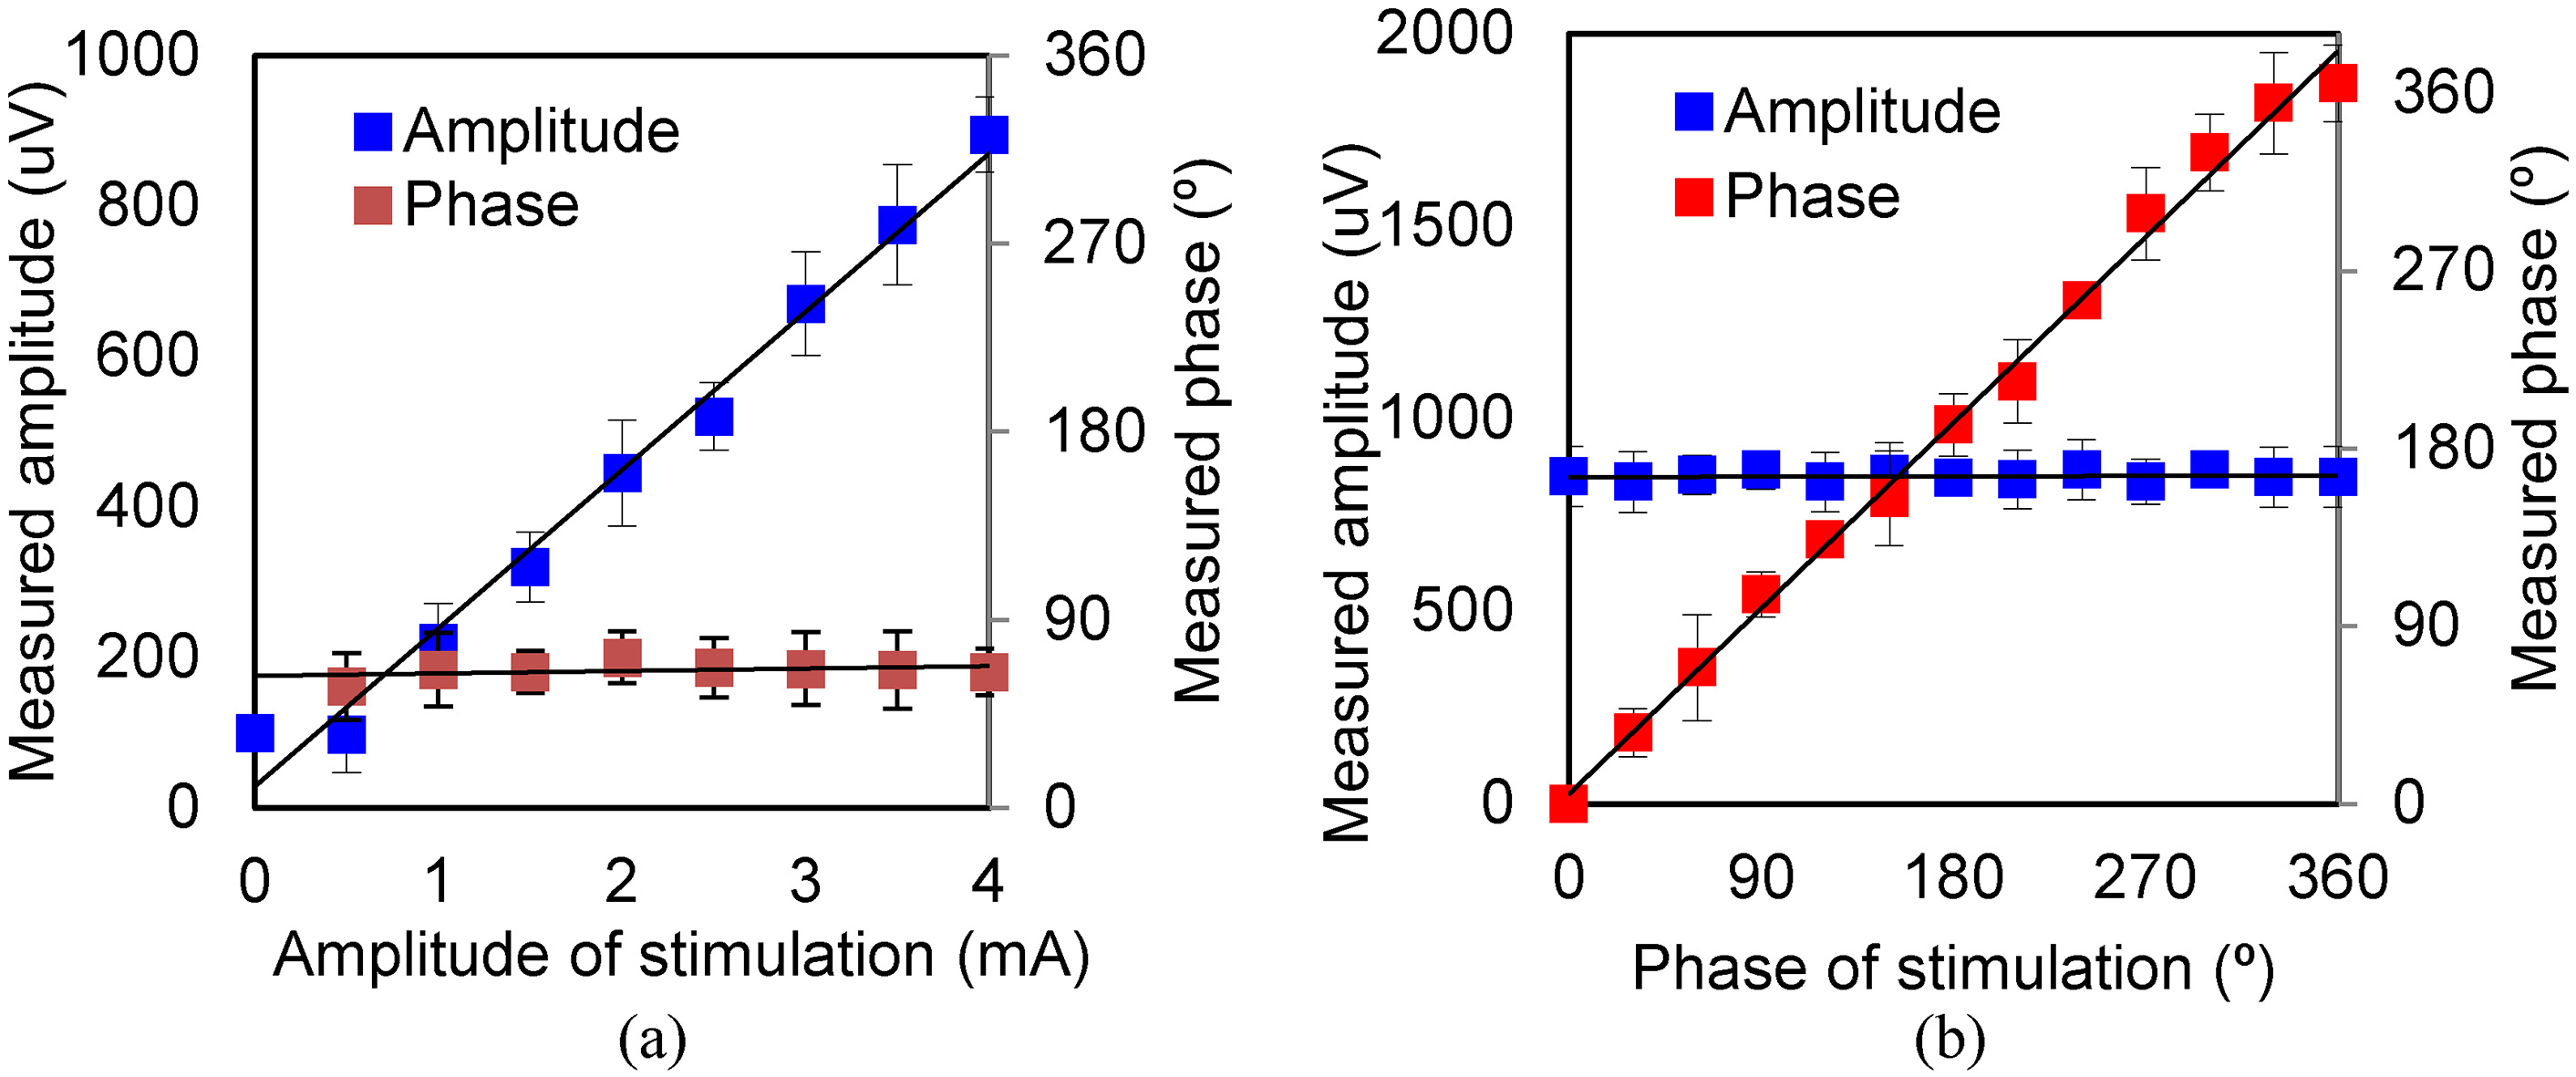 Amplitude and phase of MA signal under various levels of excitation (sinusoidal wave). (a) Results for various exciting amplitudes. (b) Results for various exciting phases.